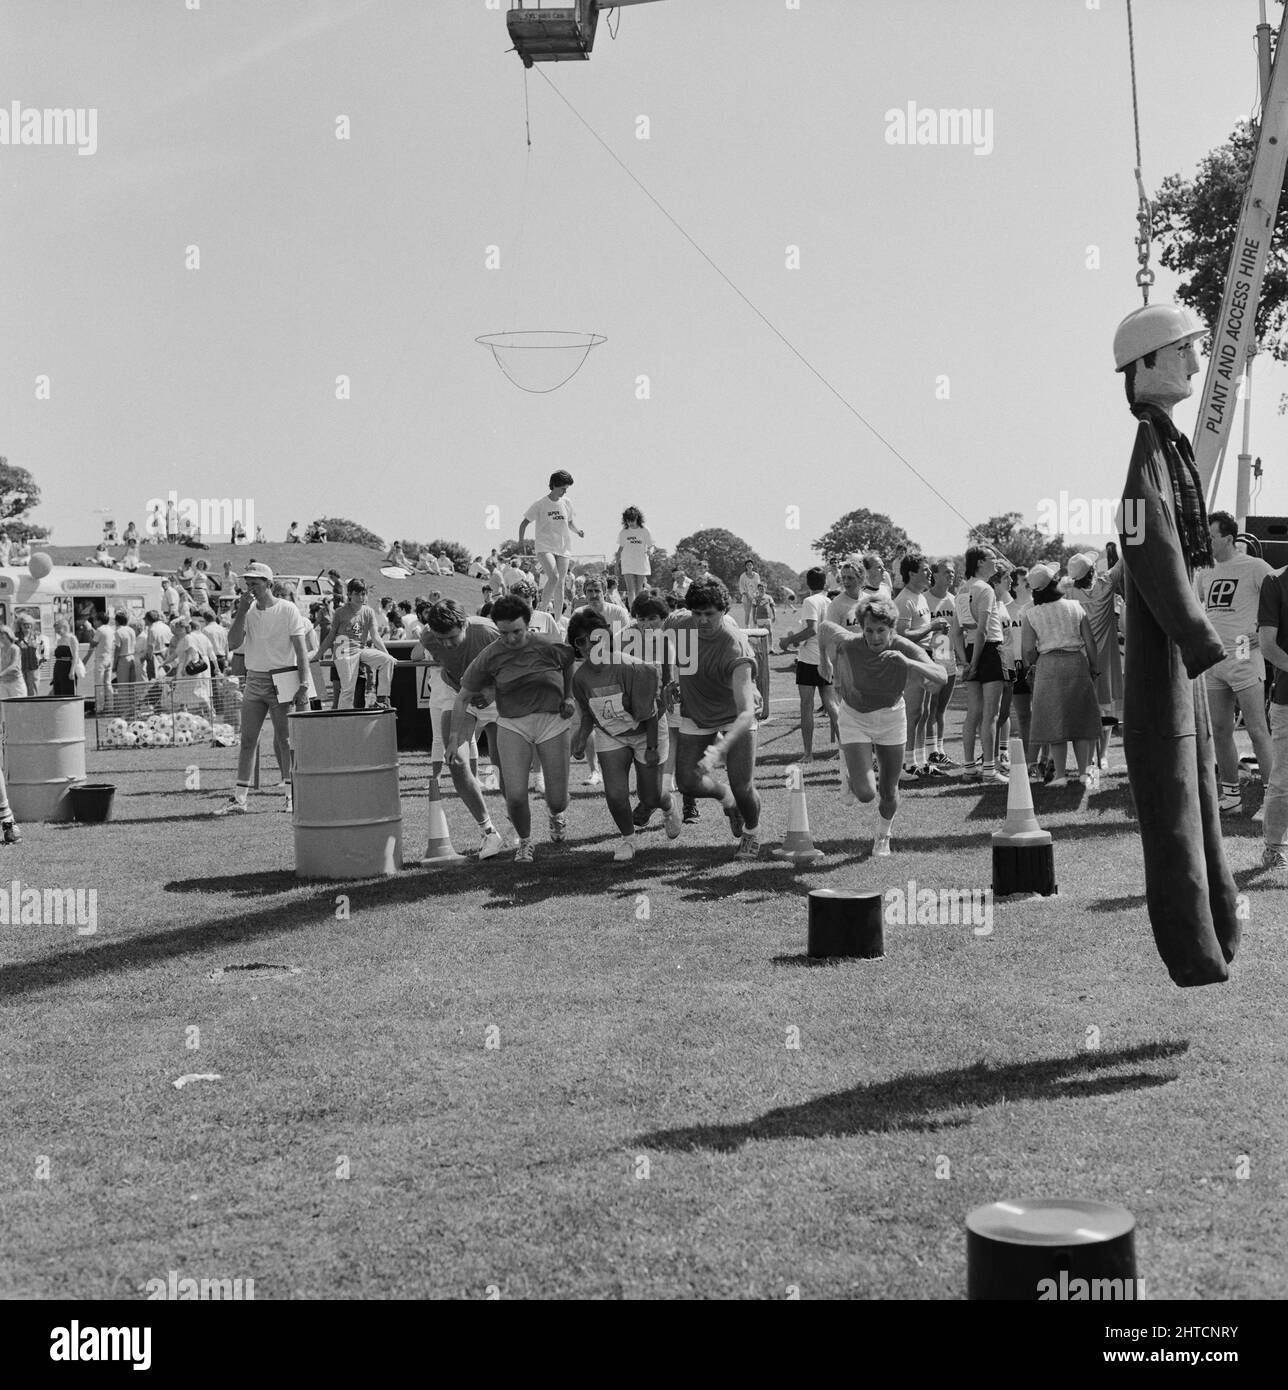 Laing Sports Ground, Rowley Lane, Elstree, Barnet, London, 21/06/1986. A team in the 'It's a Knockout' style competition at the 1986 Family Day at Laing's Sports Ground running towards the camera with the effigy of a builder from the 'swinging dummy' stage hanging on the right. Over 2500 people attended the Family Day and raised over &#xa3;700 for that year's designated charity The British Heart Foundation.  Attractions included; guest appearances by the cast of the television programme Grange Hill, a bouncy castle, donkey rides, Punch and Judy shows, Pierre the Clown, children's races, blindf Stock Photo